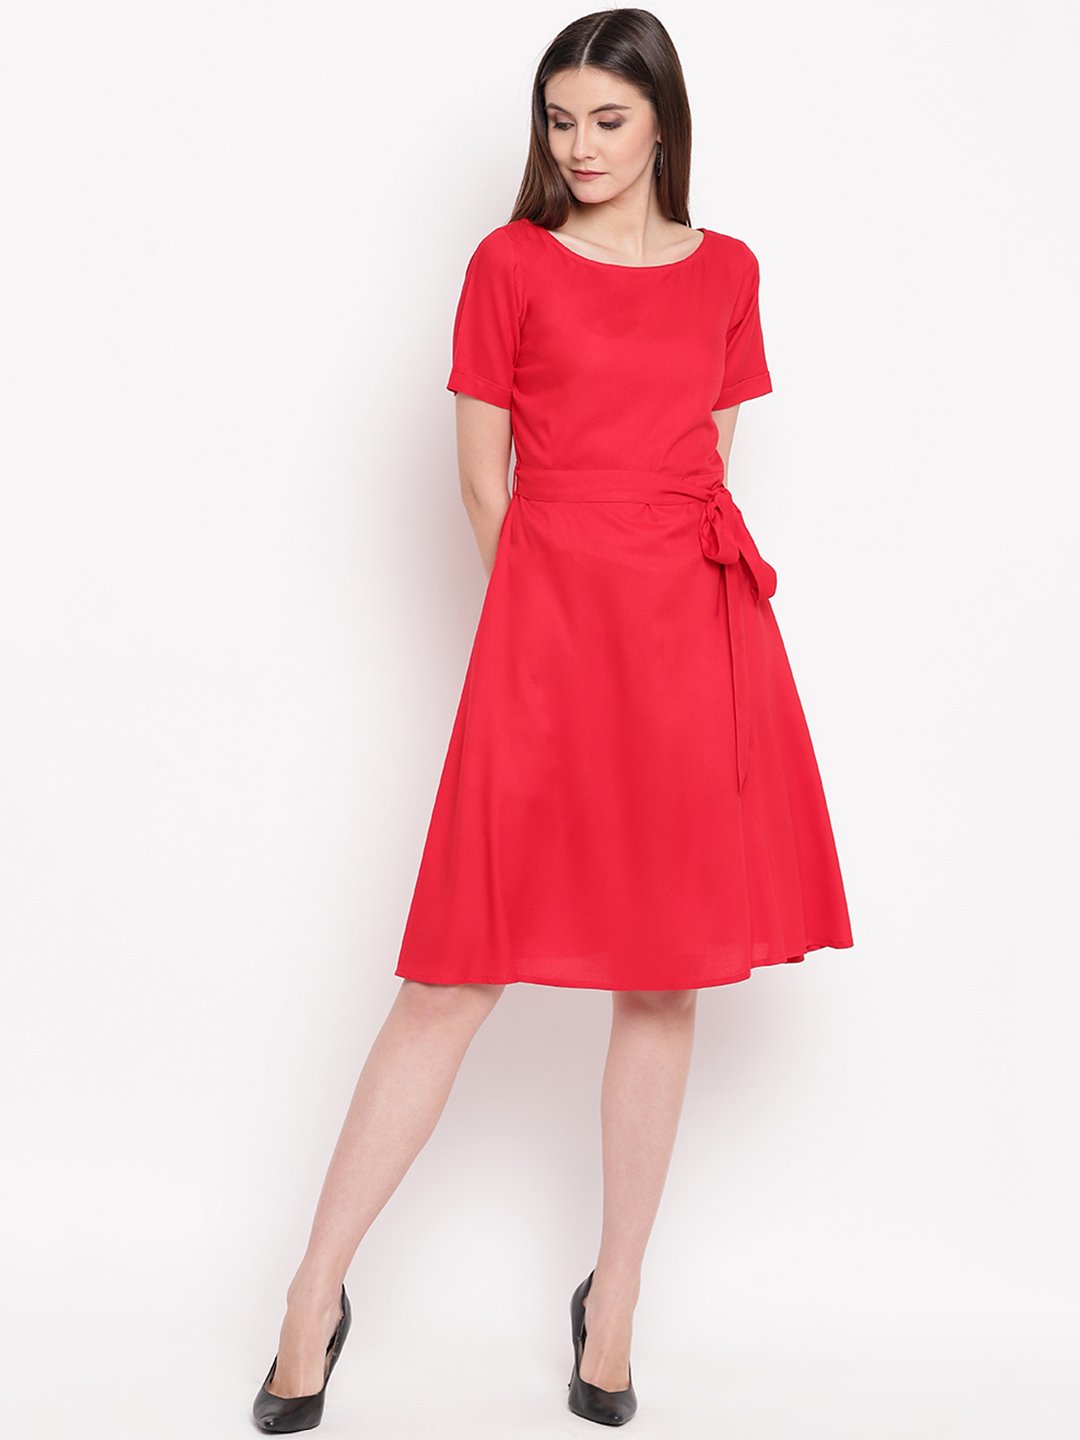 Red fit and flare knee length dress with belt at waist-Dresses-Fabnest